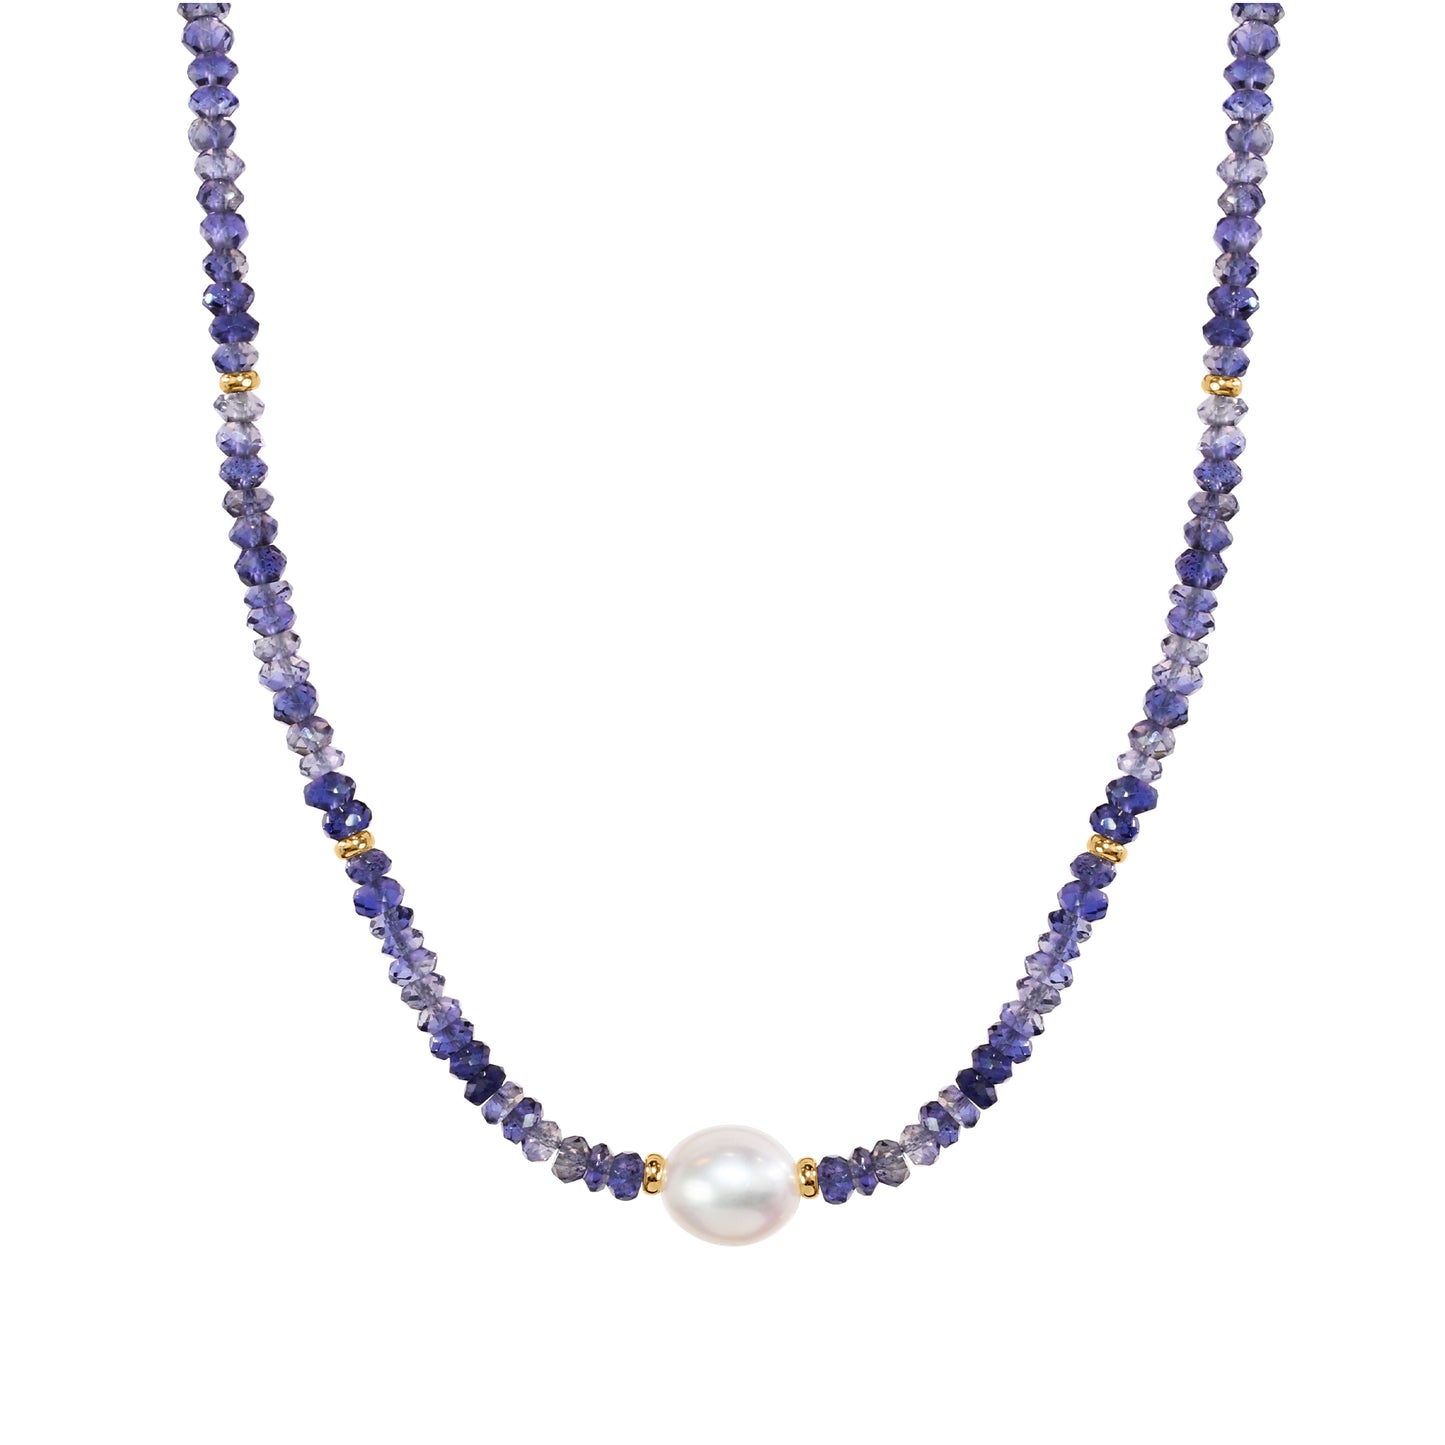 14k Iolite White Freshwater Pearl Necklace 17"